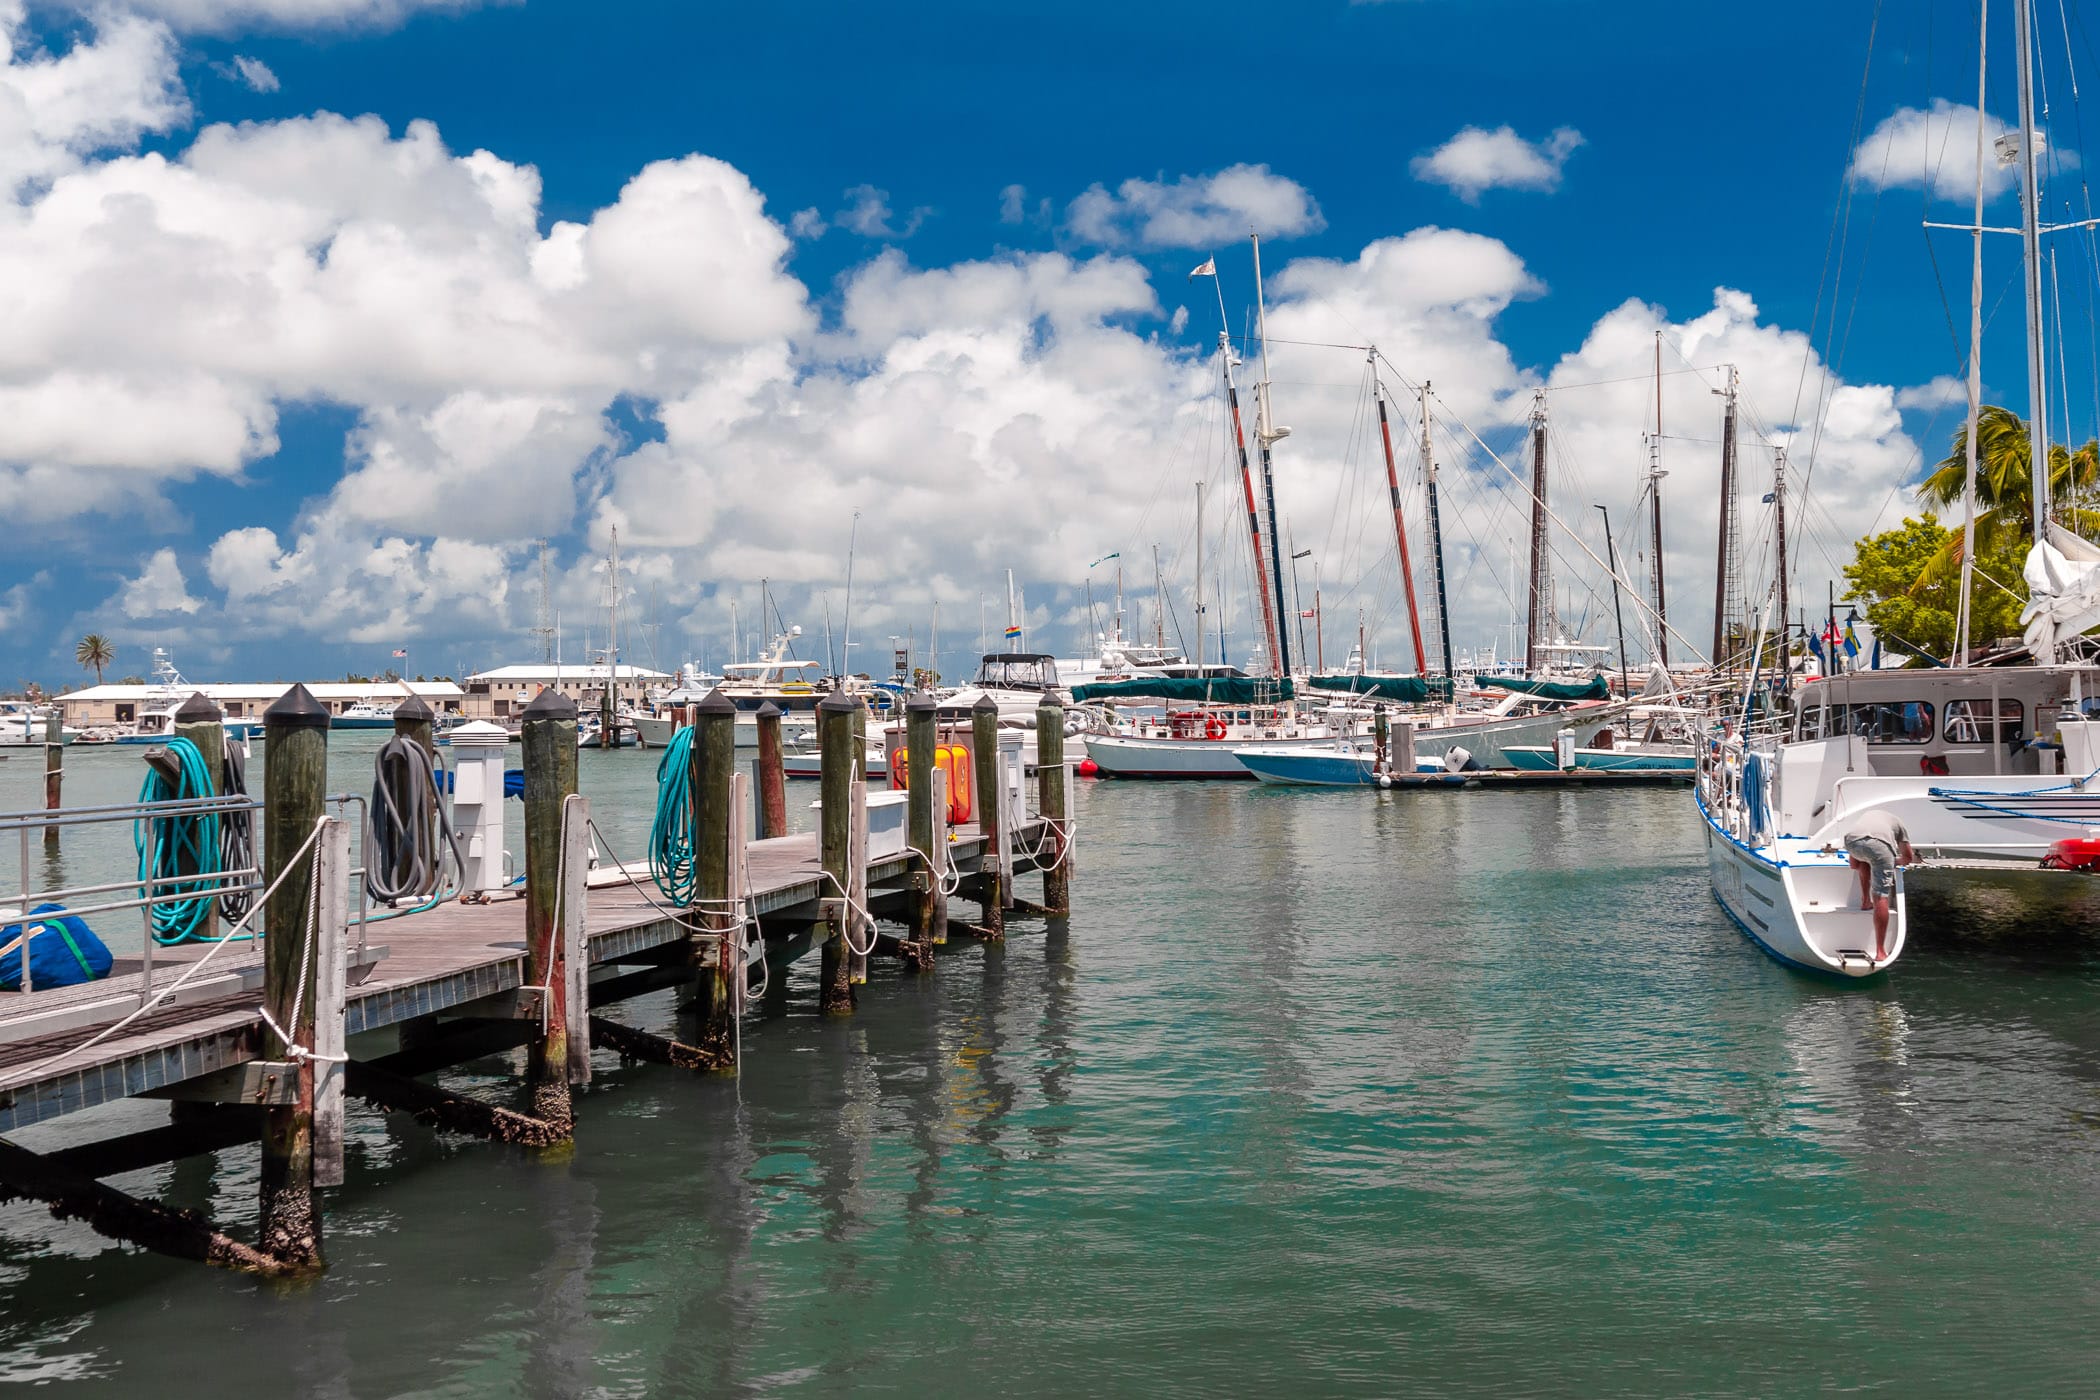 Boats docked in a harbor in Key West, Florida.